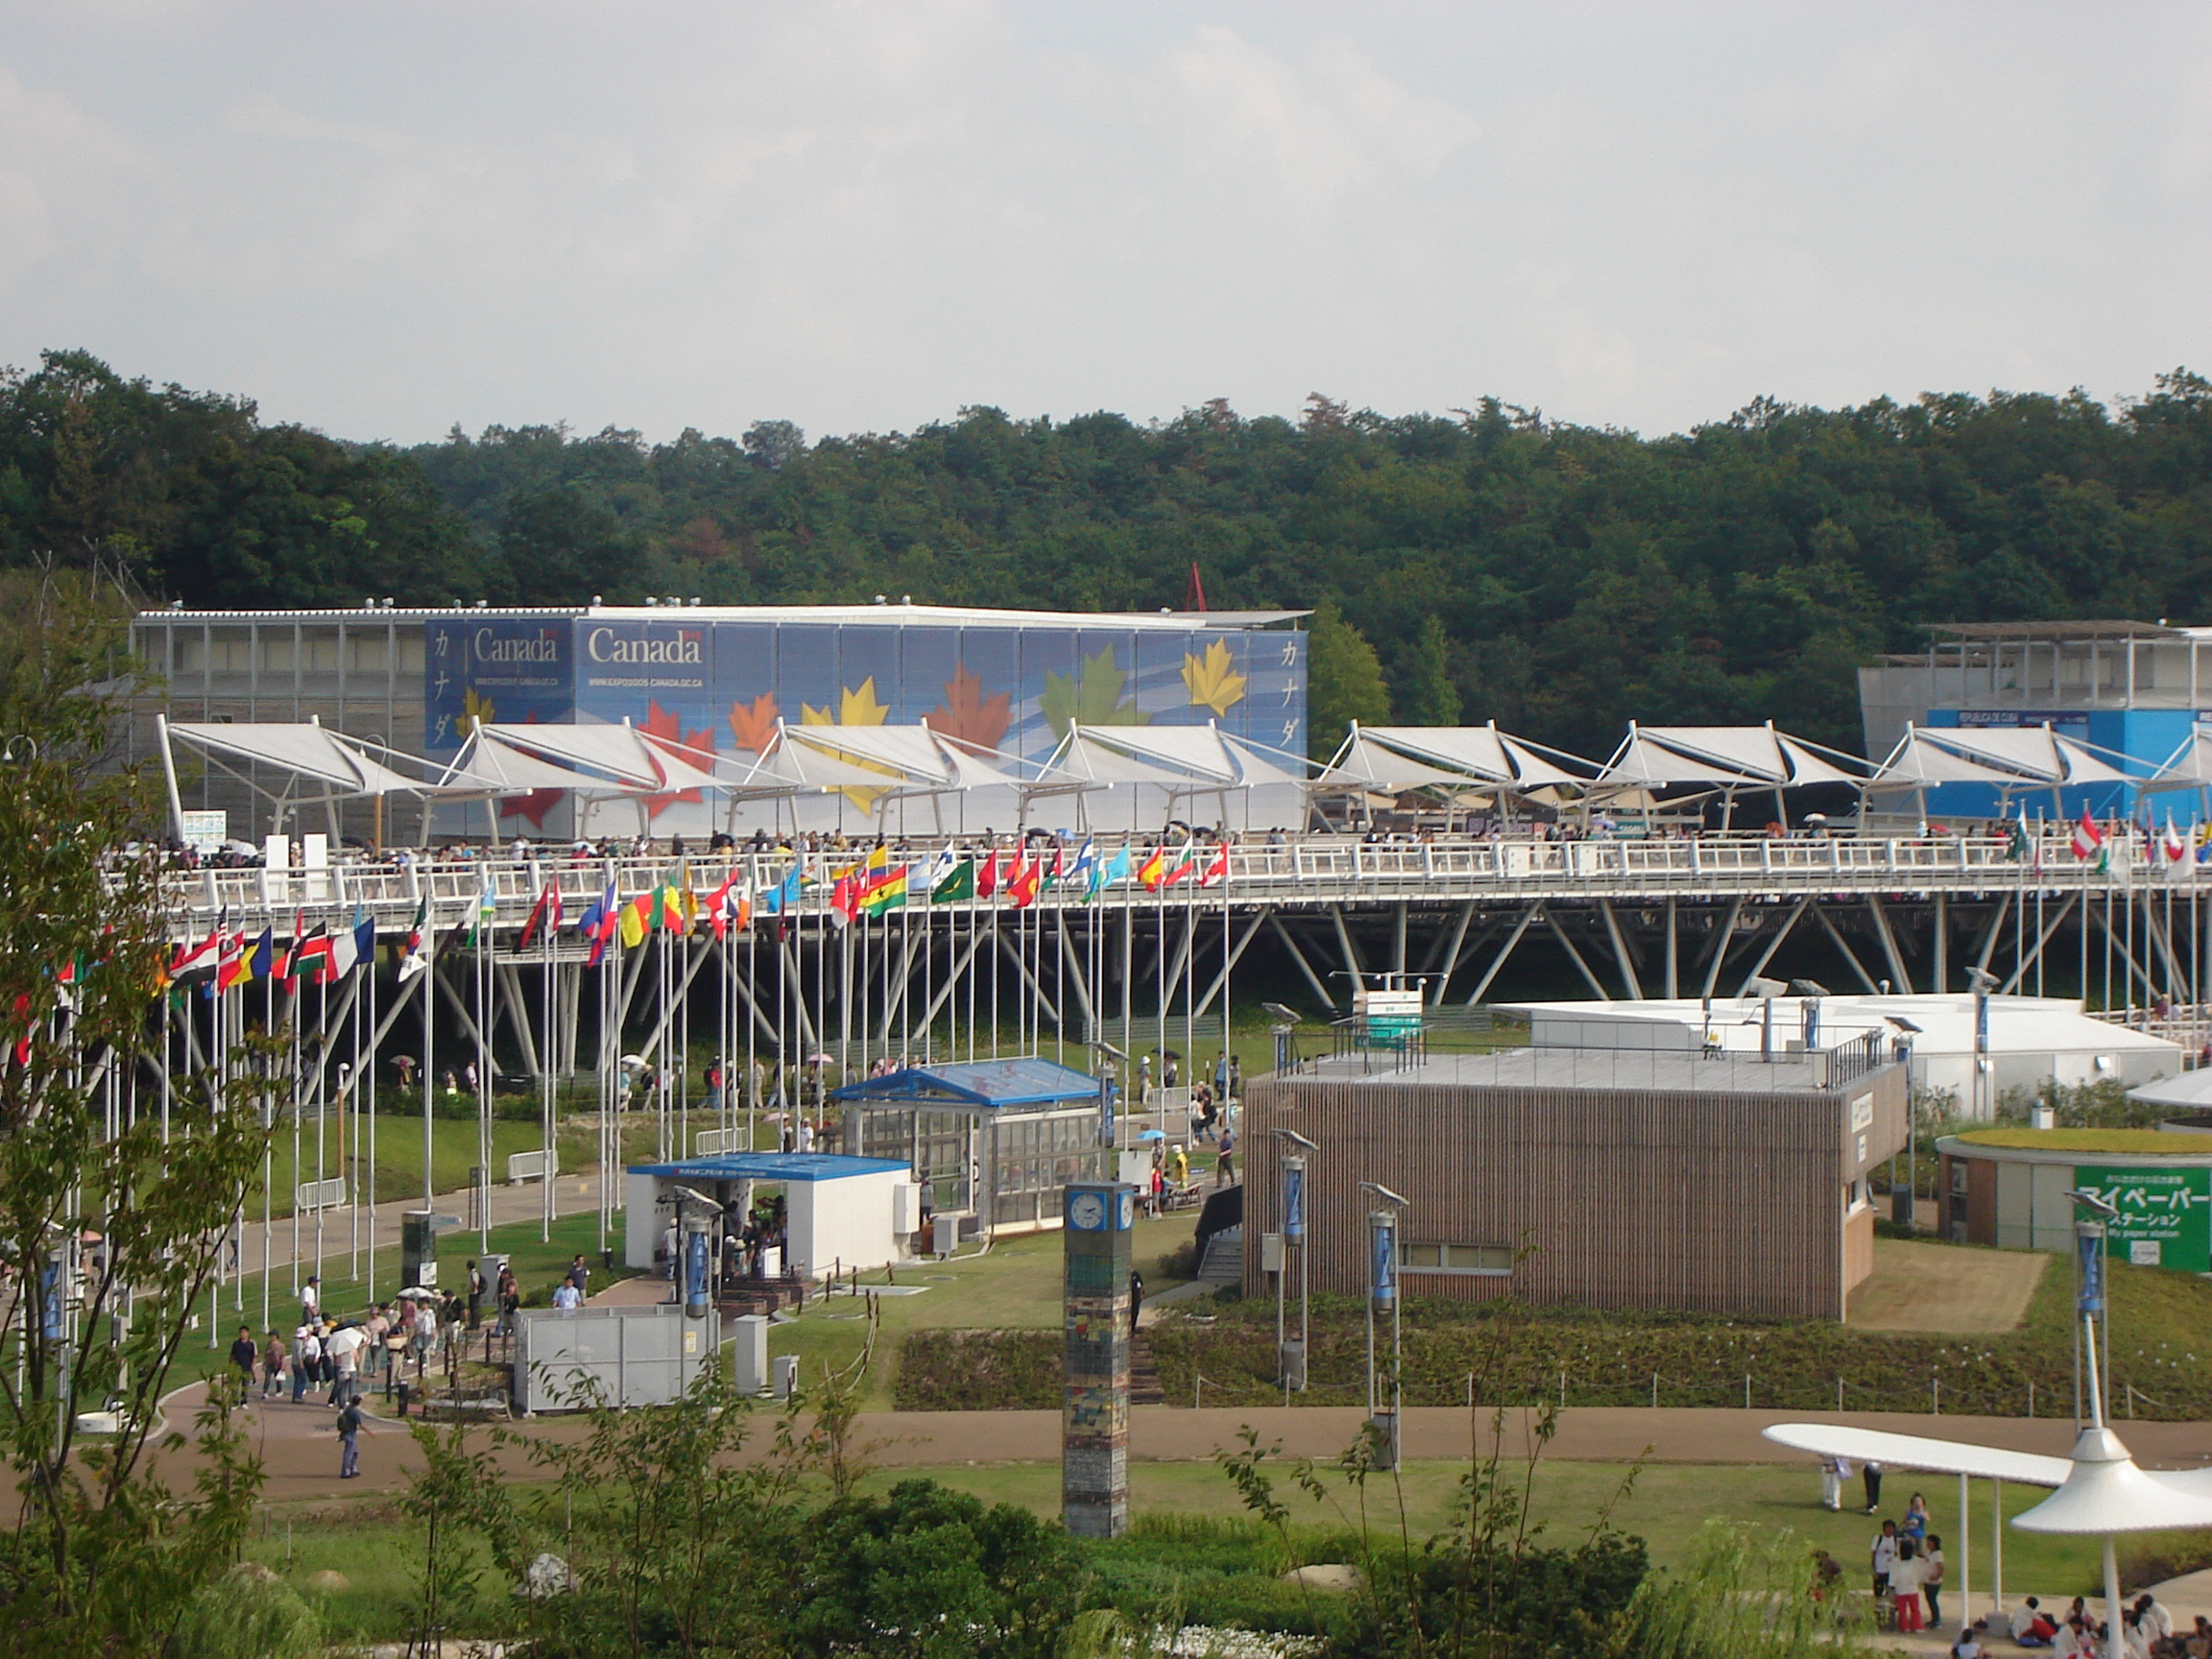 the expo grounds, centered on the Canada pavillion